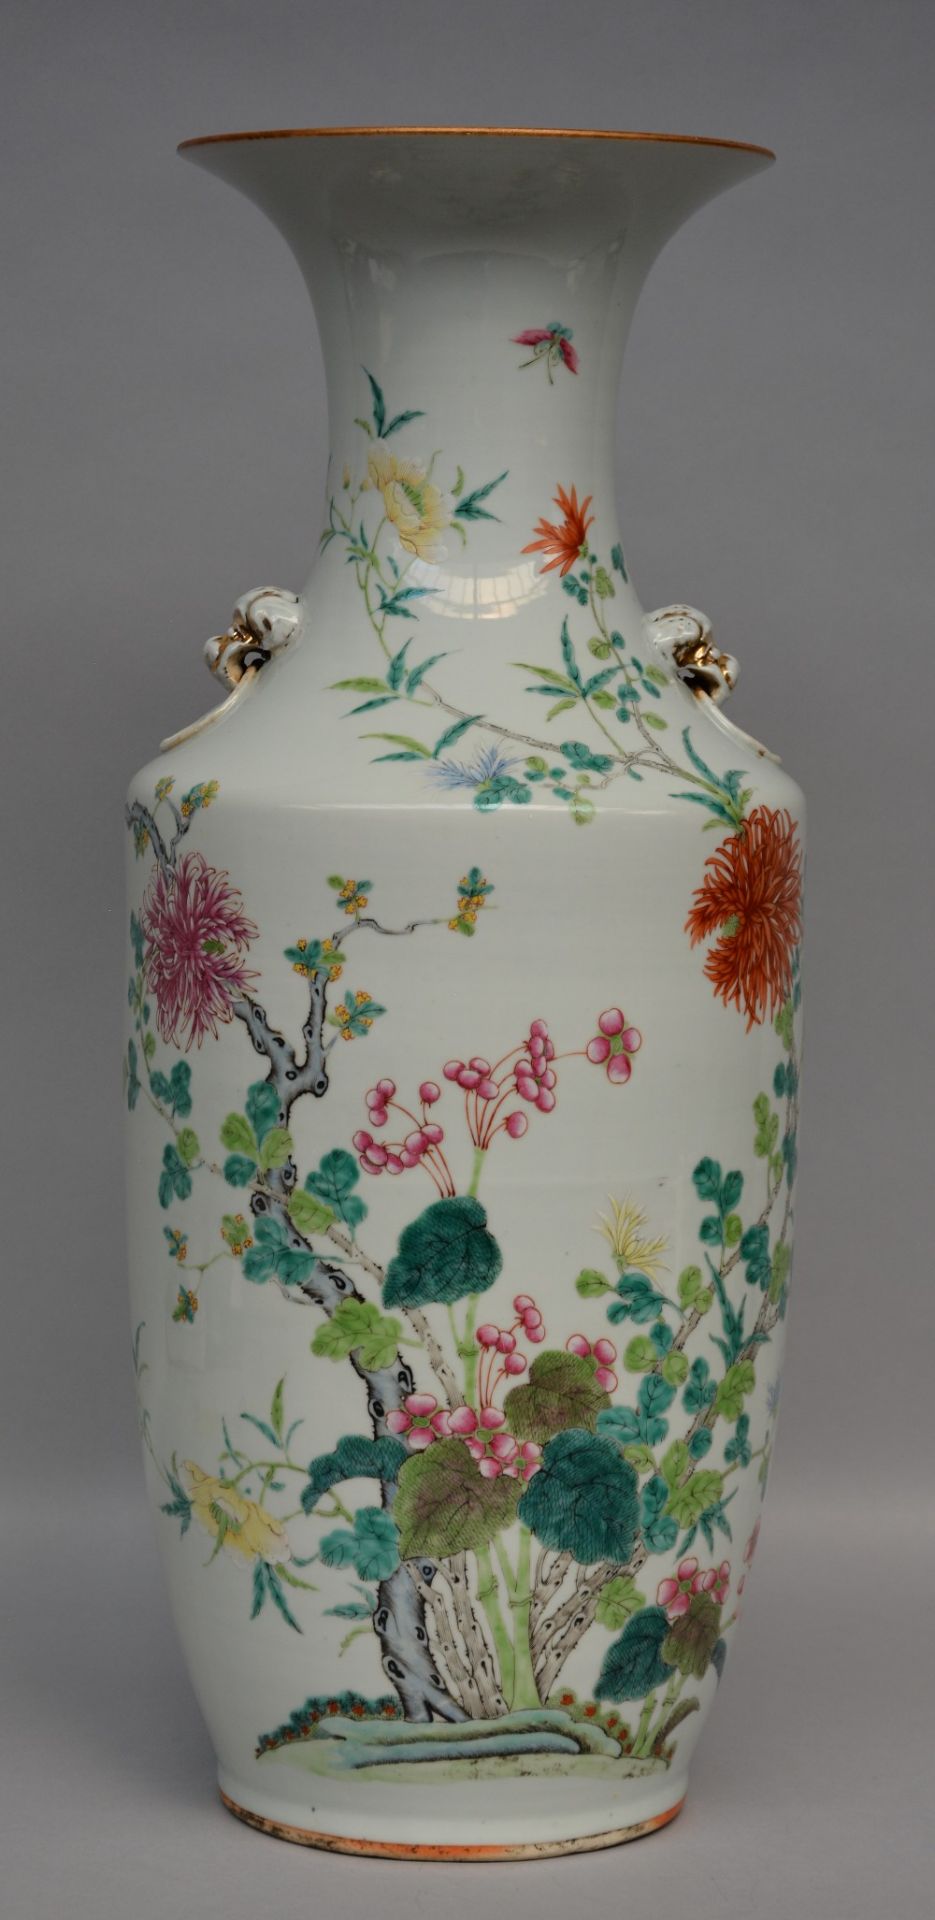 A Chinese polychrome vase with floral decoration, marked, 19thC, H 58 cm